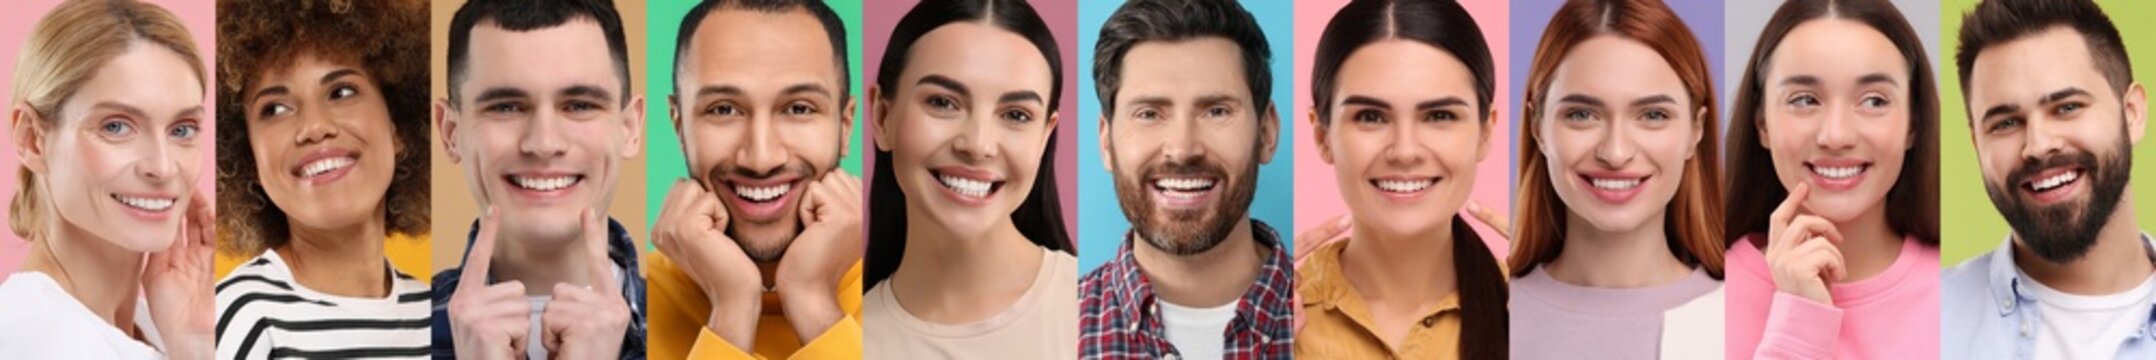 People with showing white teeth on different color backgrounds, collage of photos